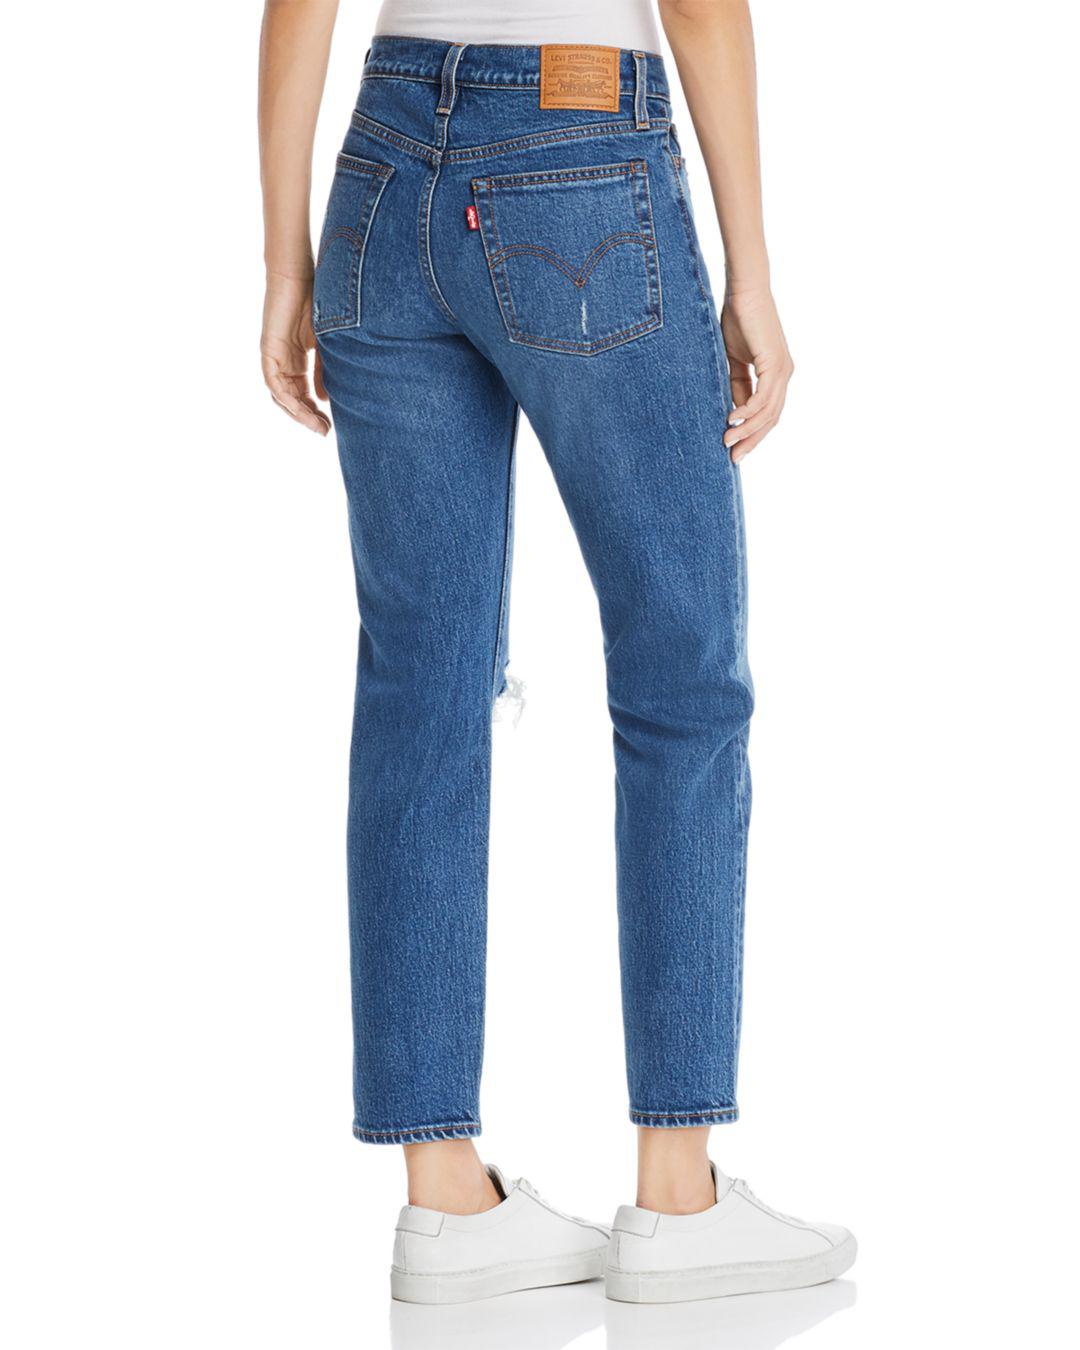 Levi's Denim Wedgie Icon Fit Straight Jeans In Higher Love in Blue - Lyst